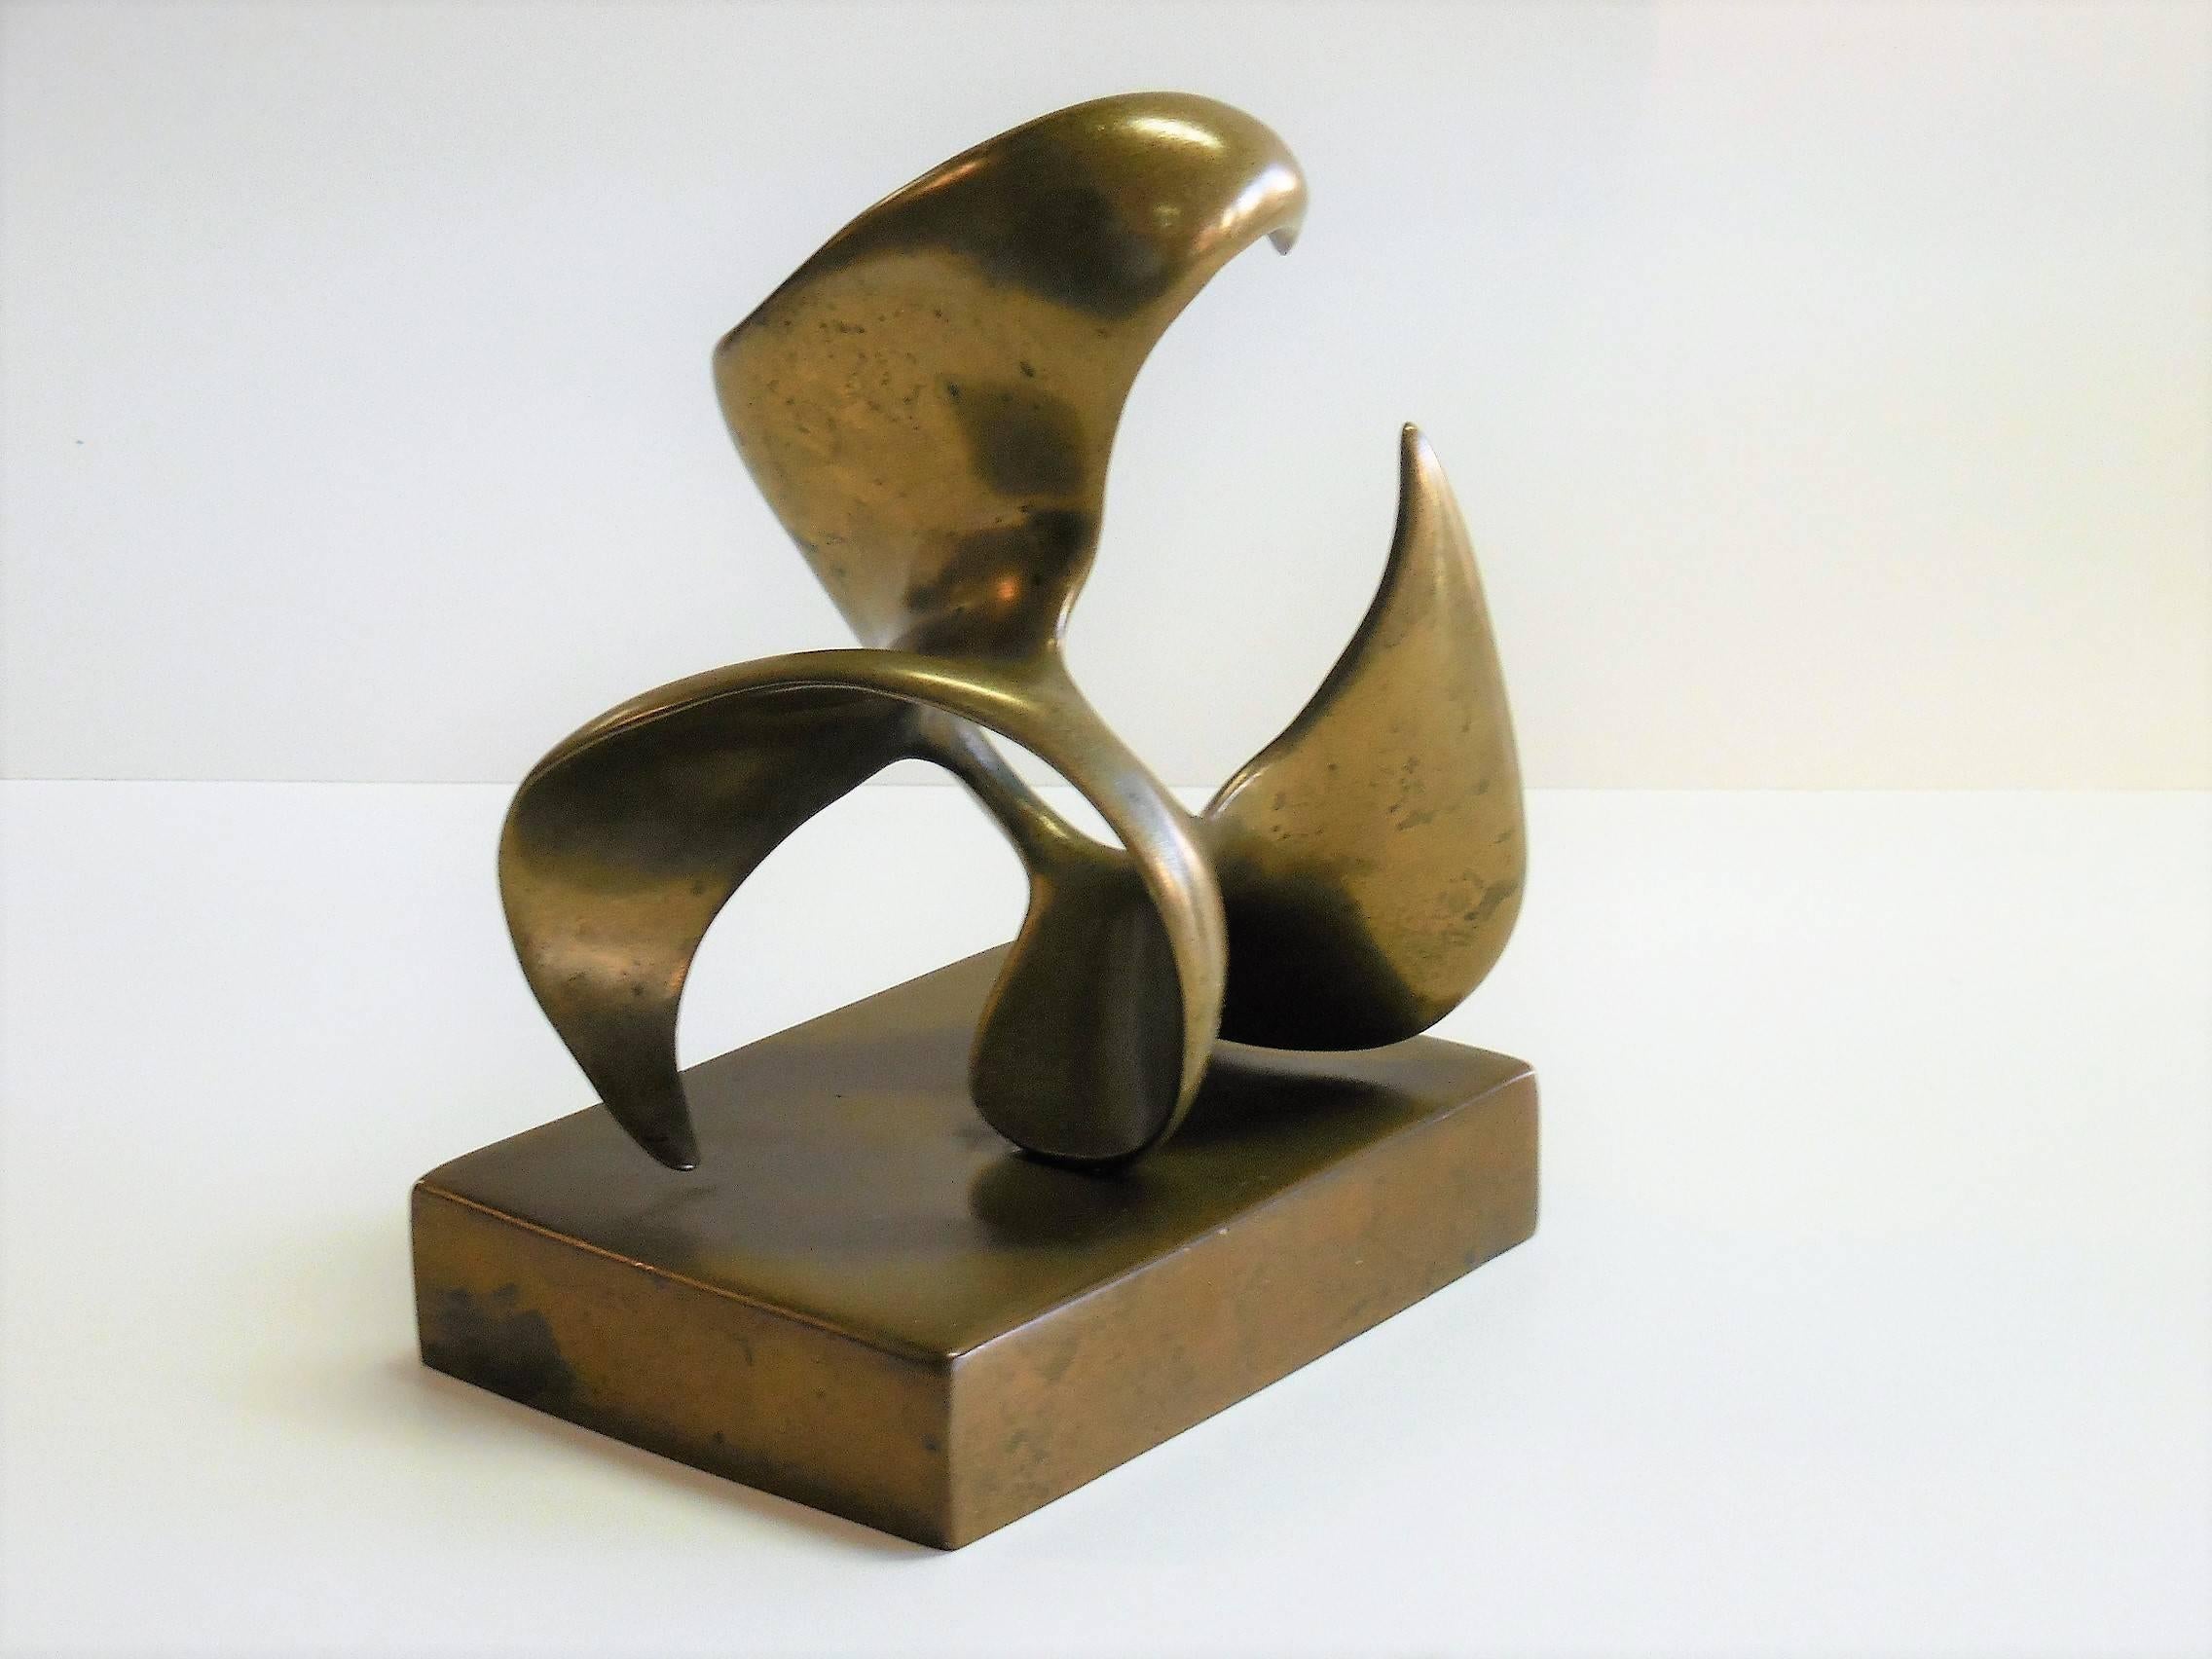 A bronze sculpture by Eli Karpel. Exciting form that can be appreciated from an angle. Retains natural patina. Signed and dated on base.